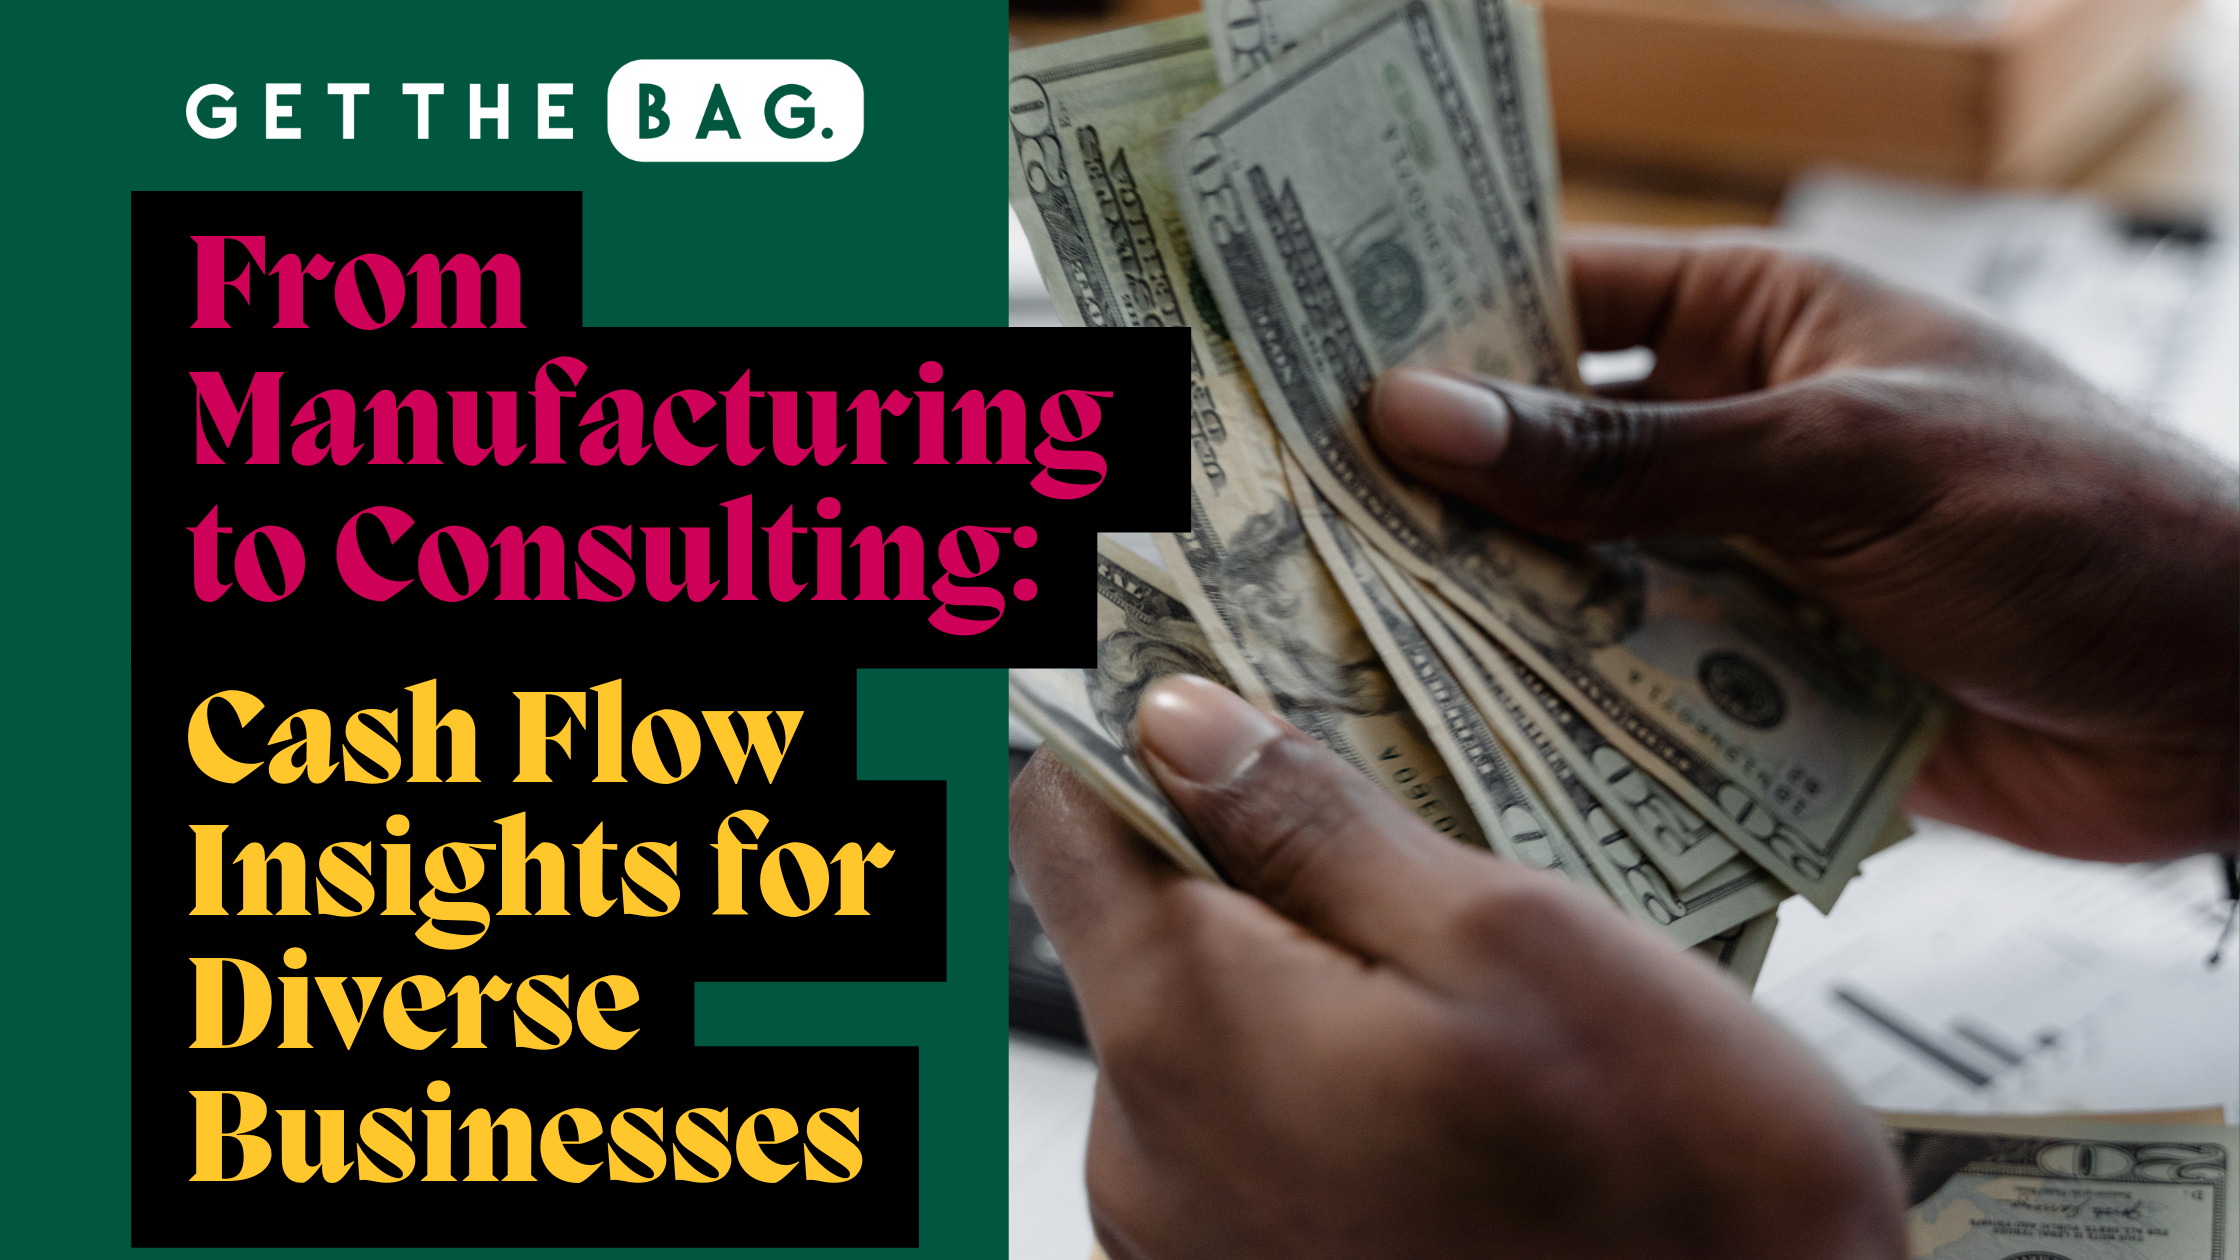 From Manufacturing to Consulting: Cash Flow Insights for Diverse Businesses